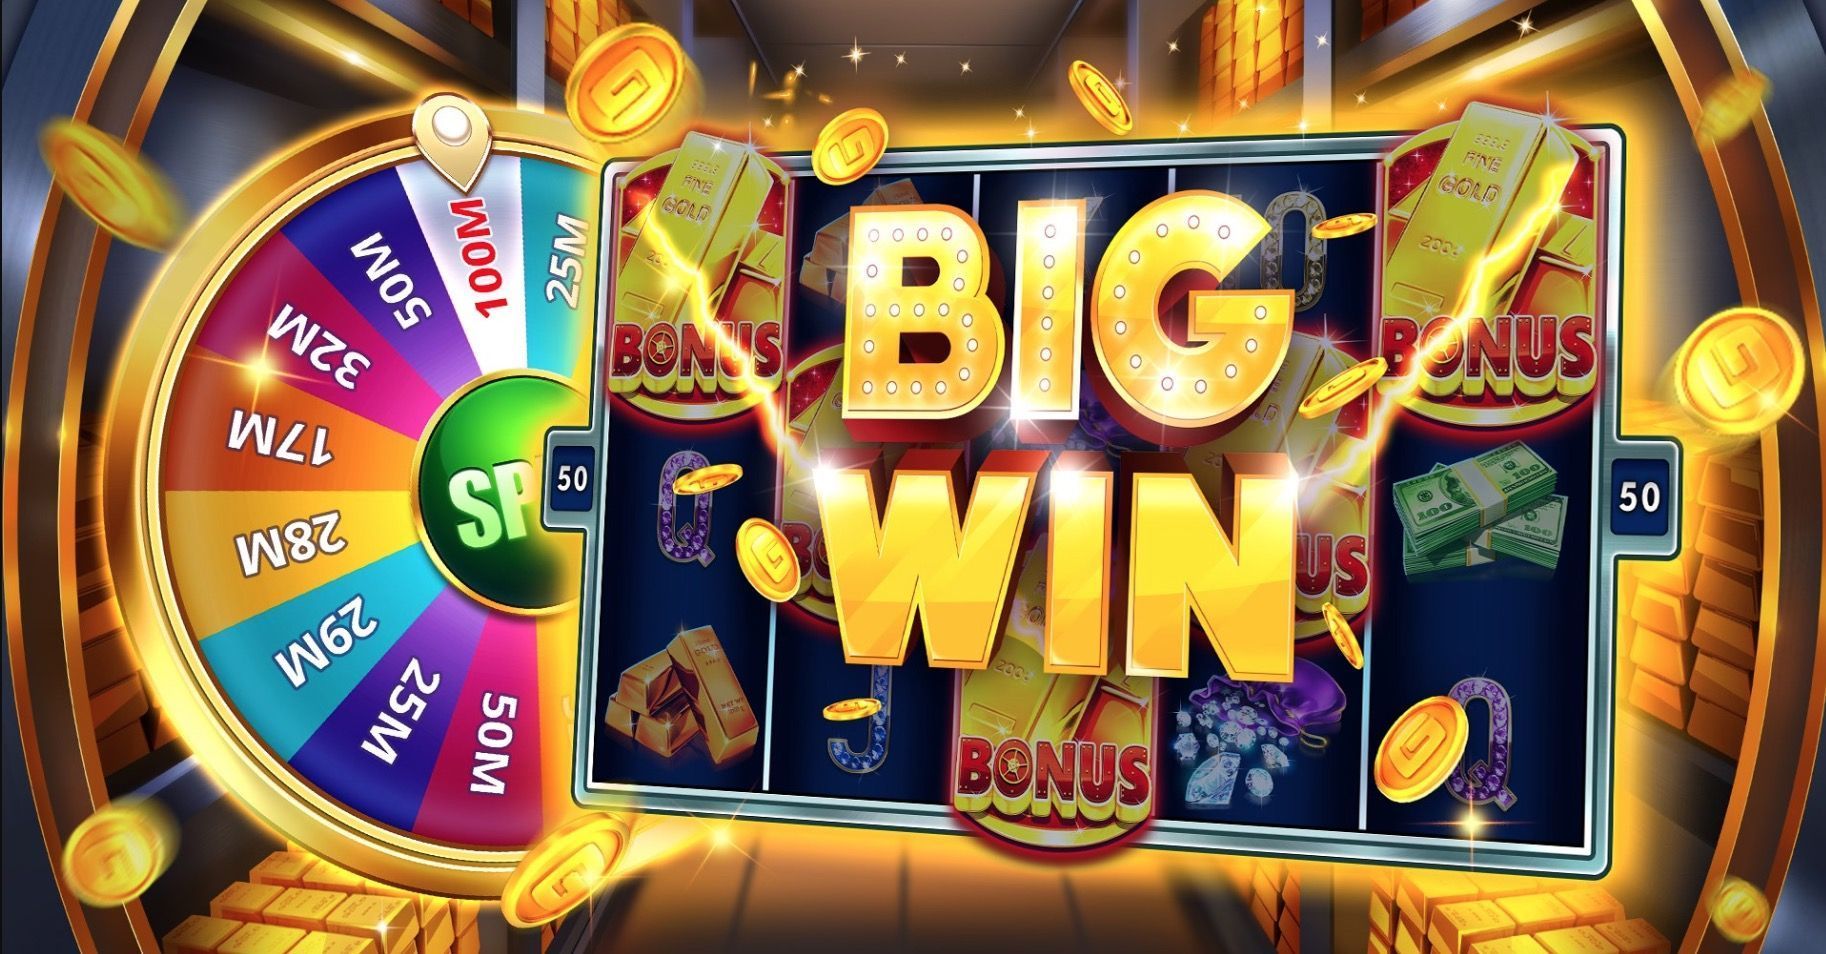 Game Review New Slots 2020 － Free Casino Games & Fun Slot Machines to